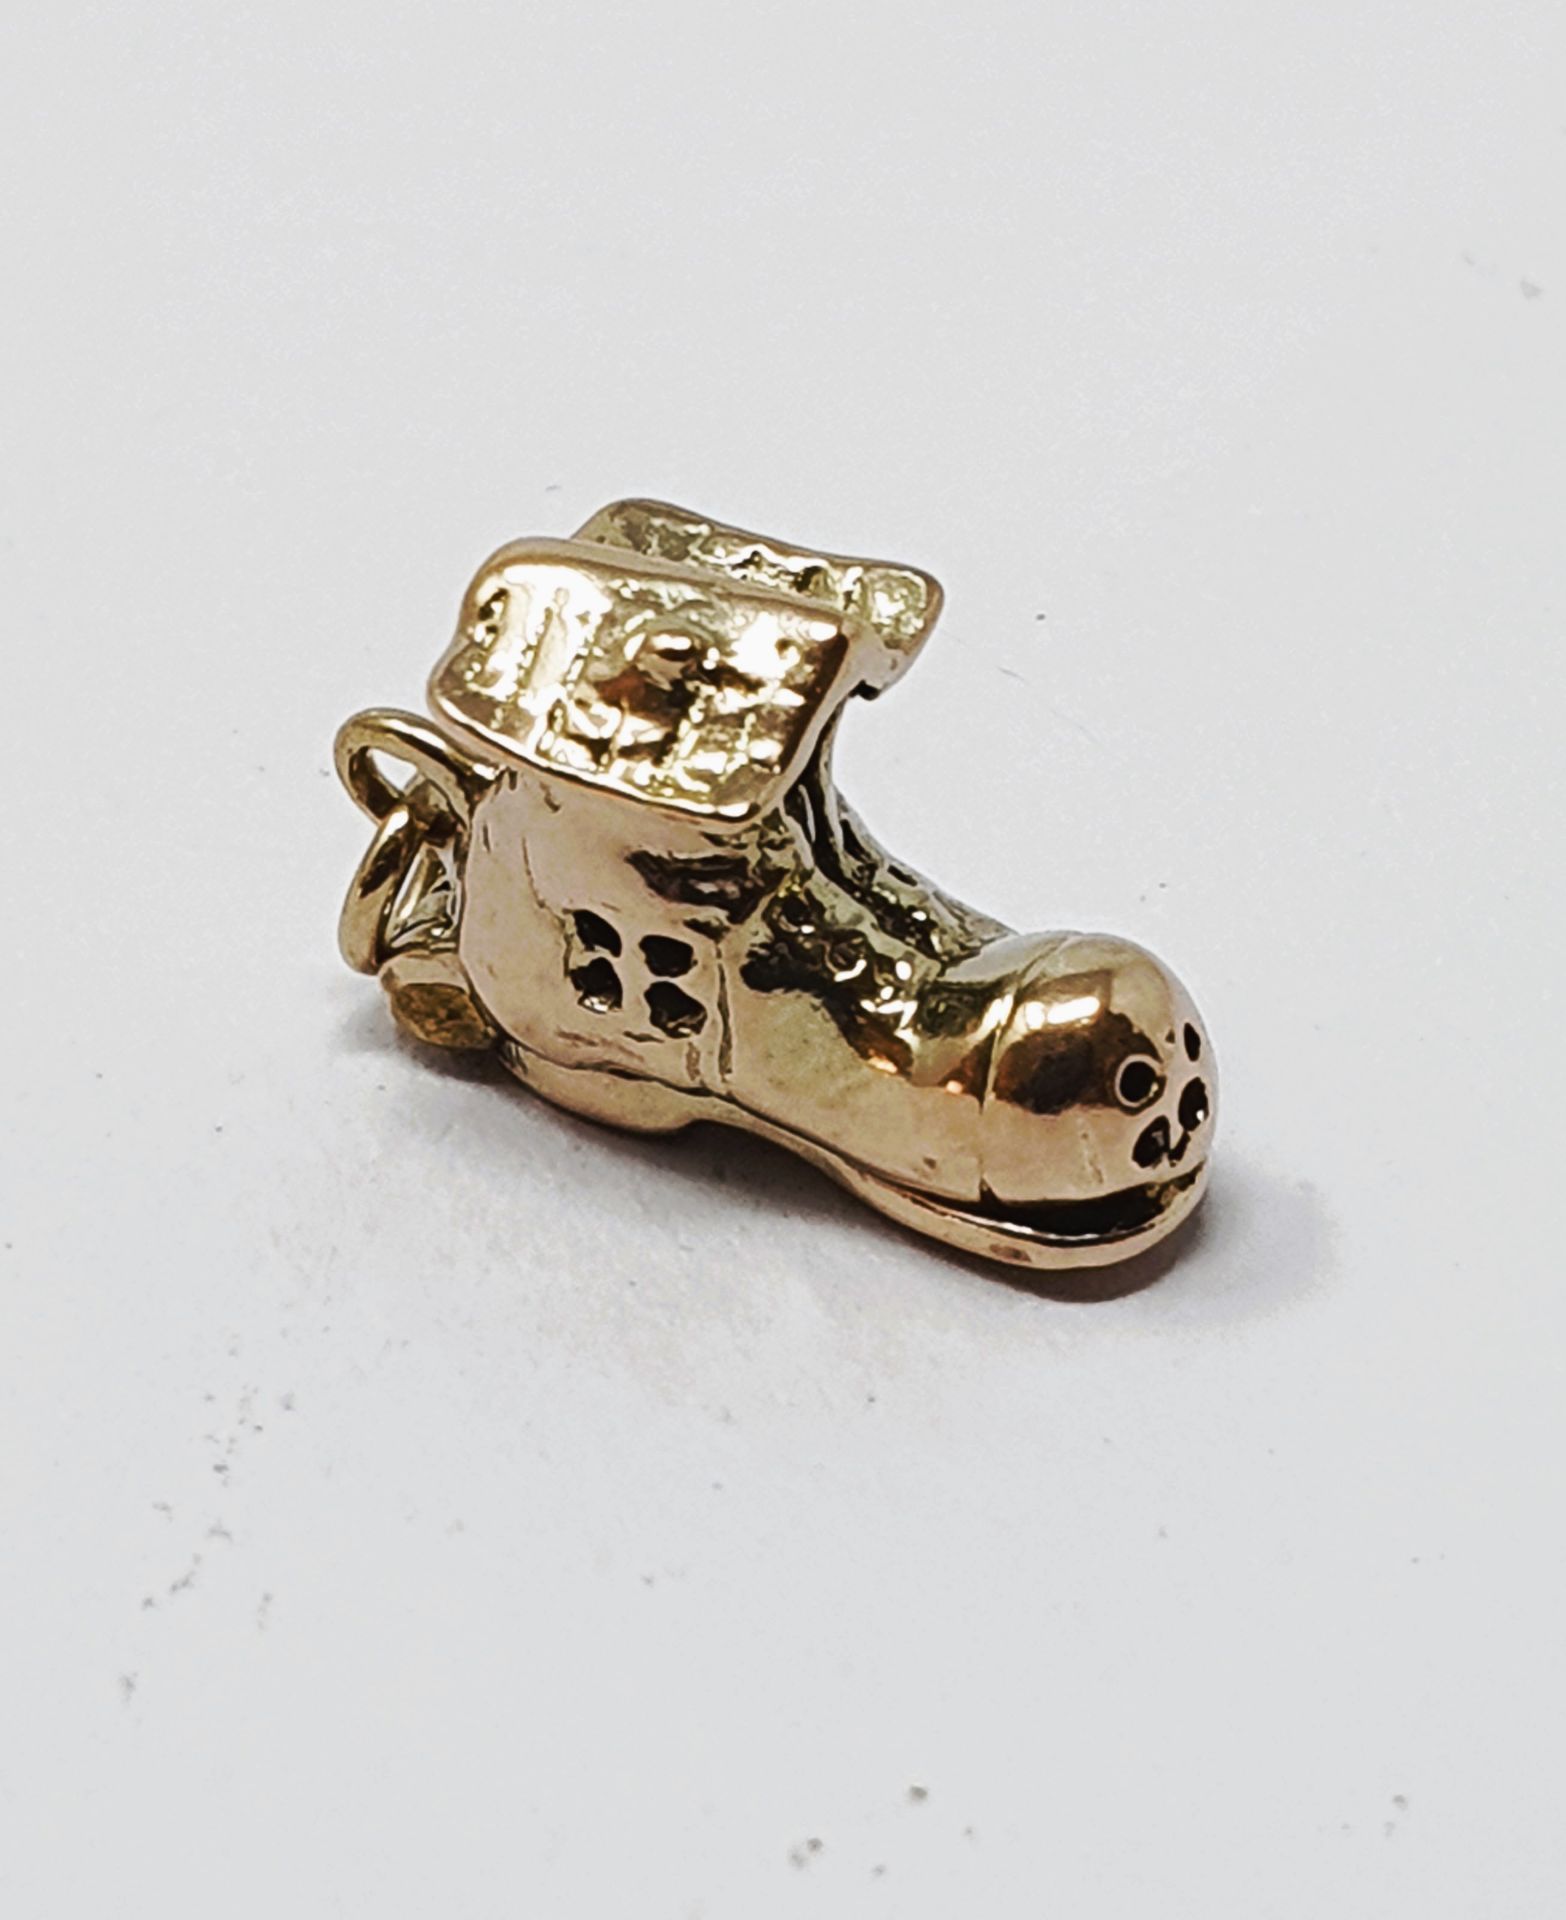 9ct gold vintage lady in shoe charm, gross weight 2.